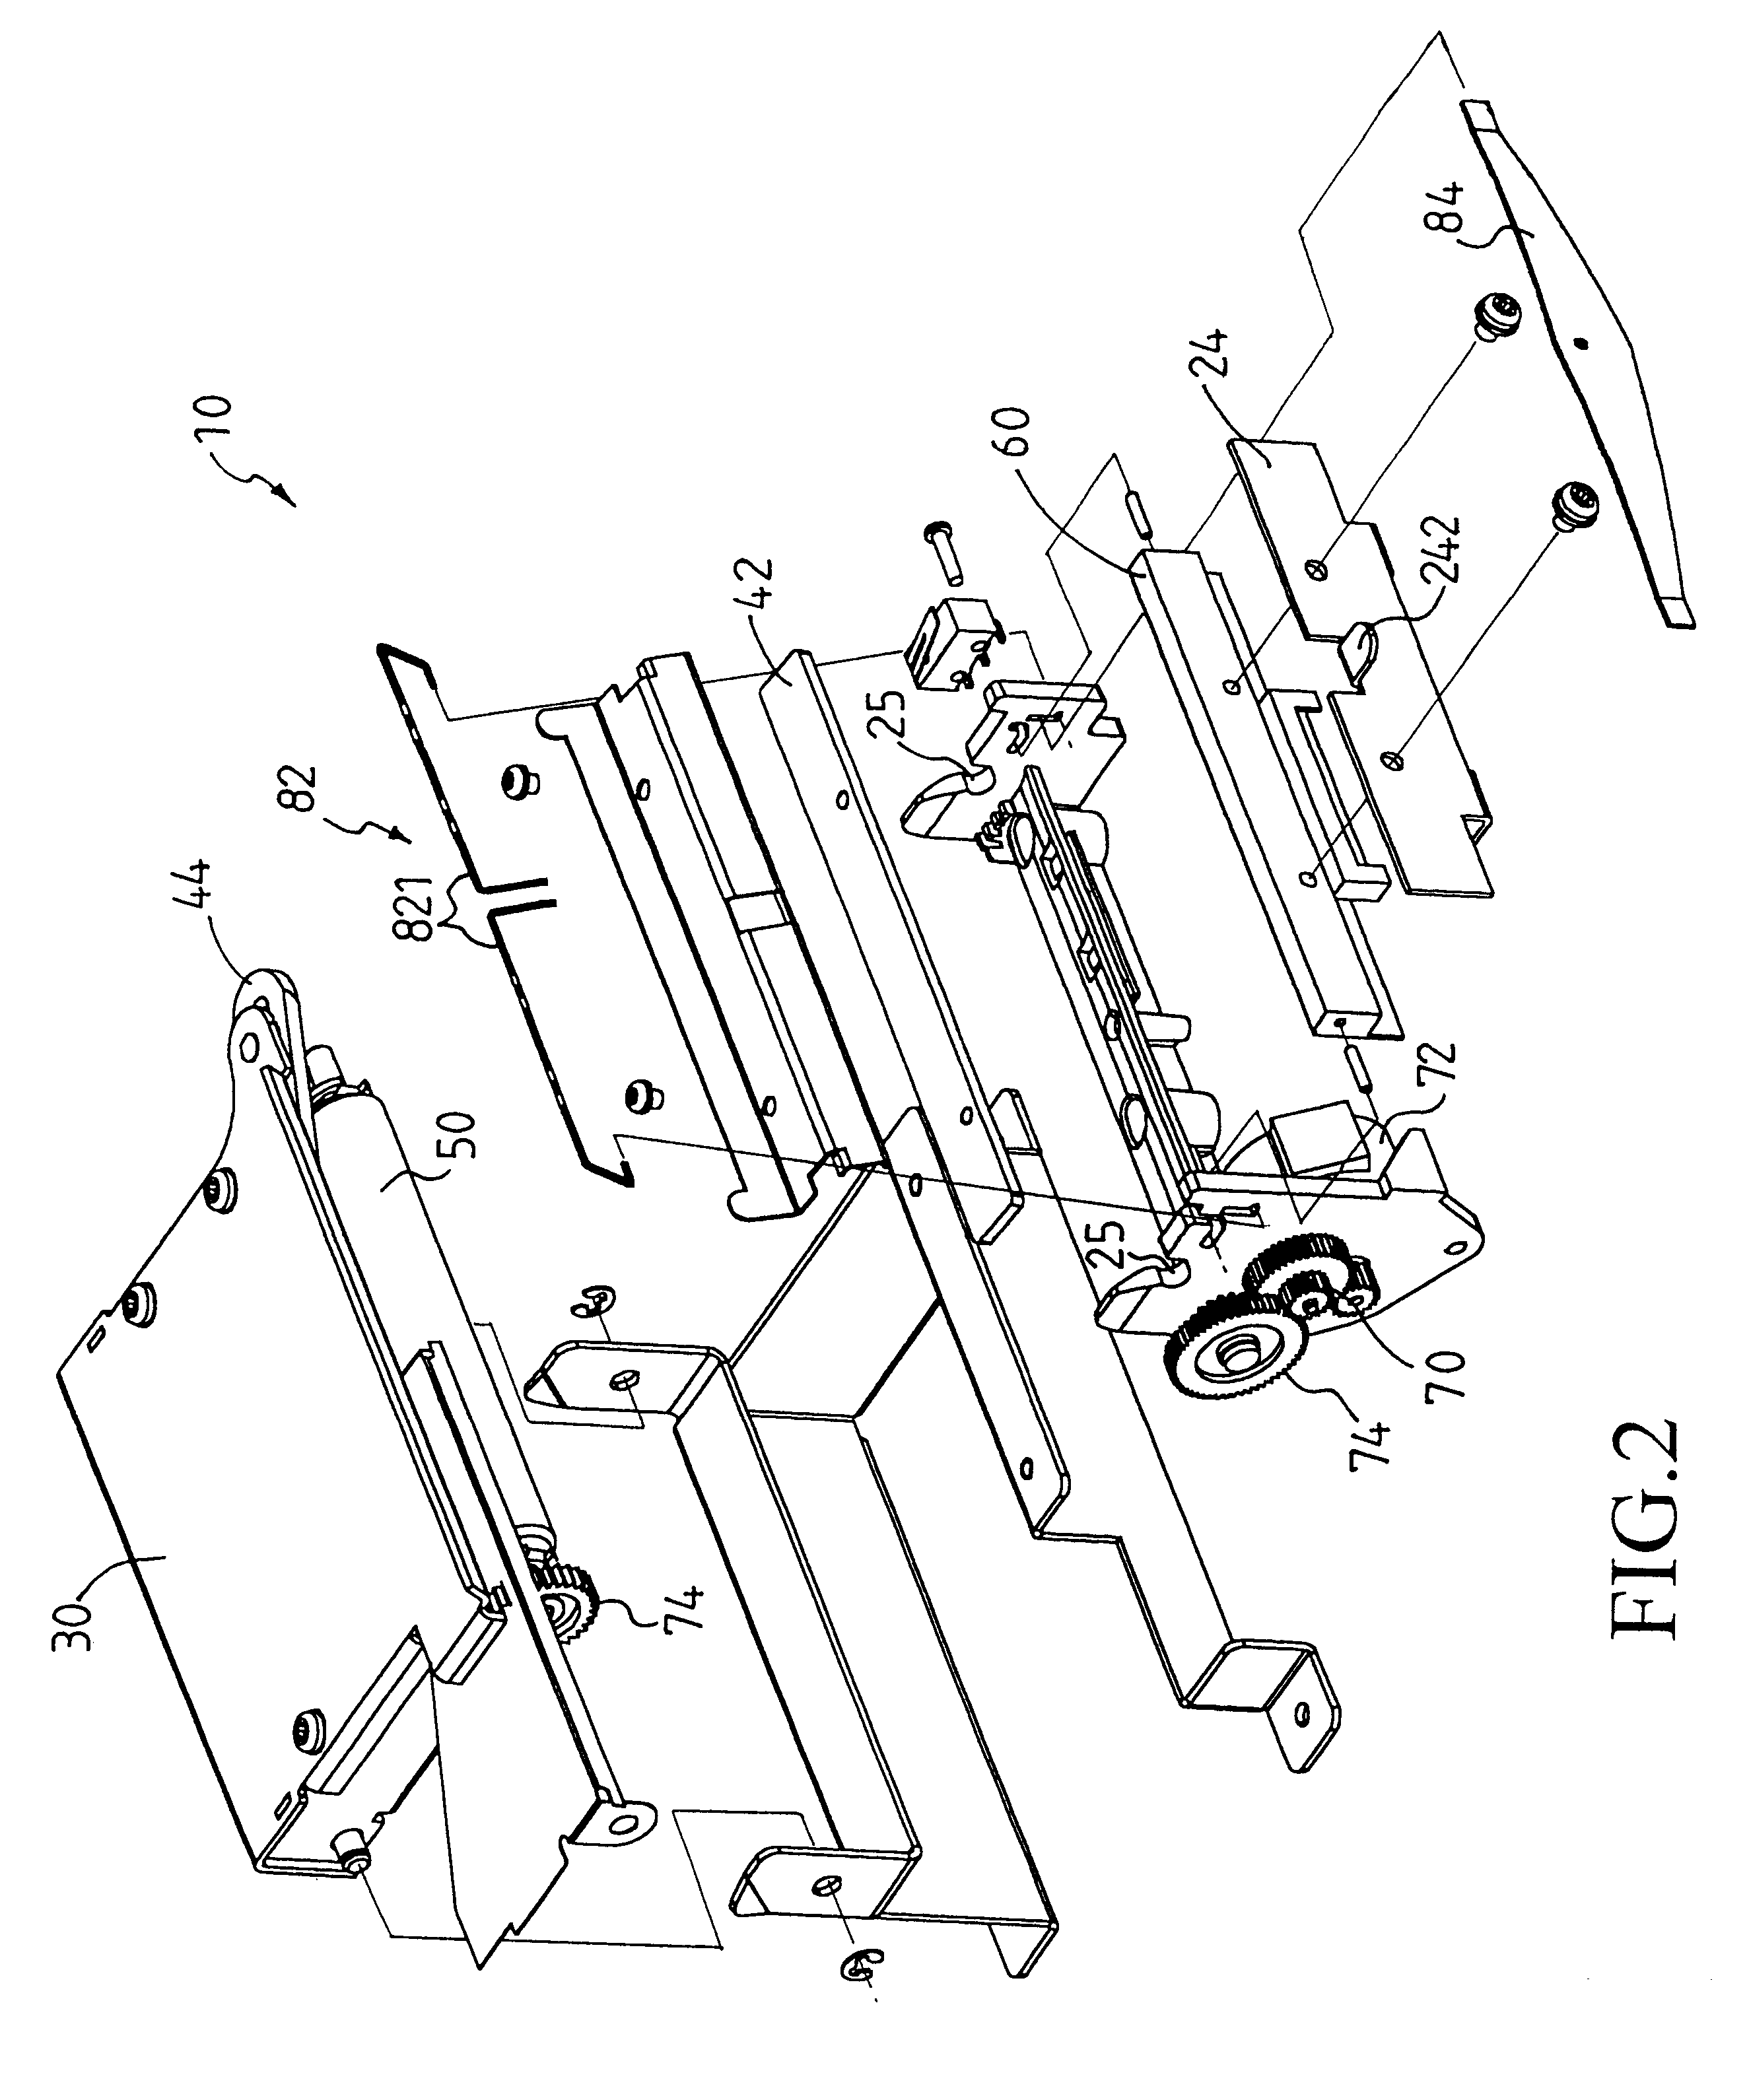 Restraining module for a cutter of a printer